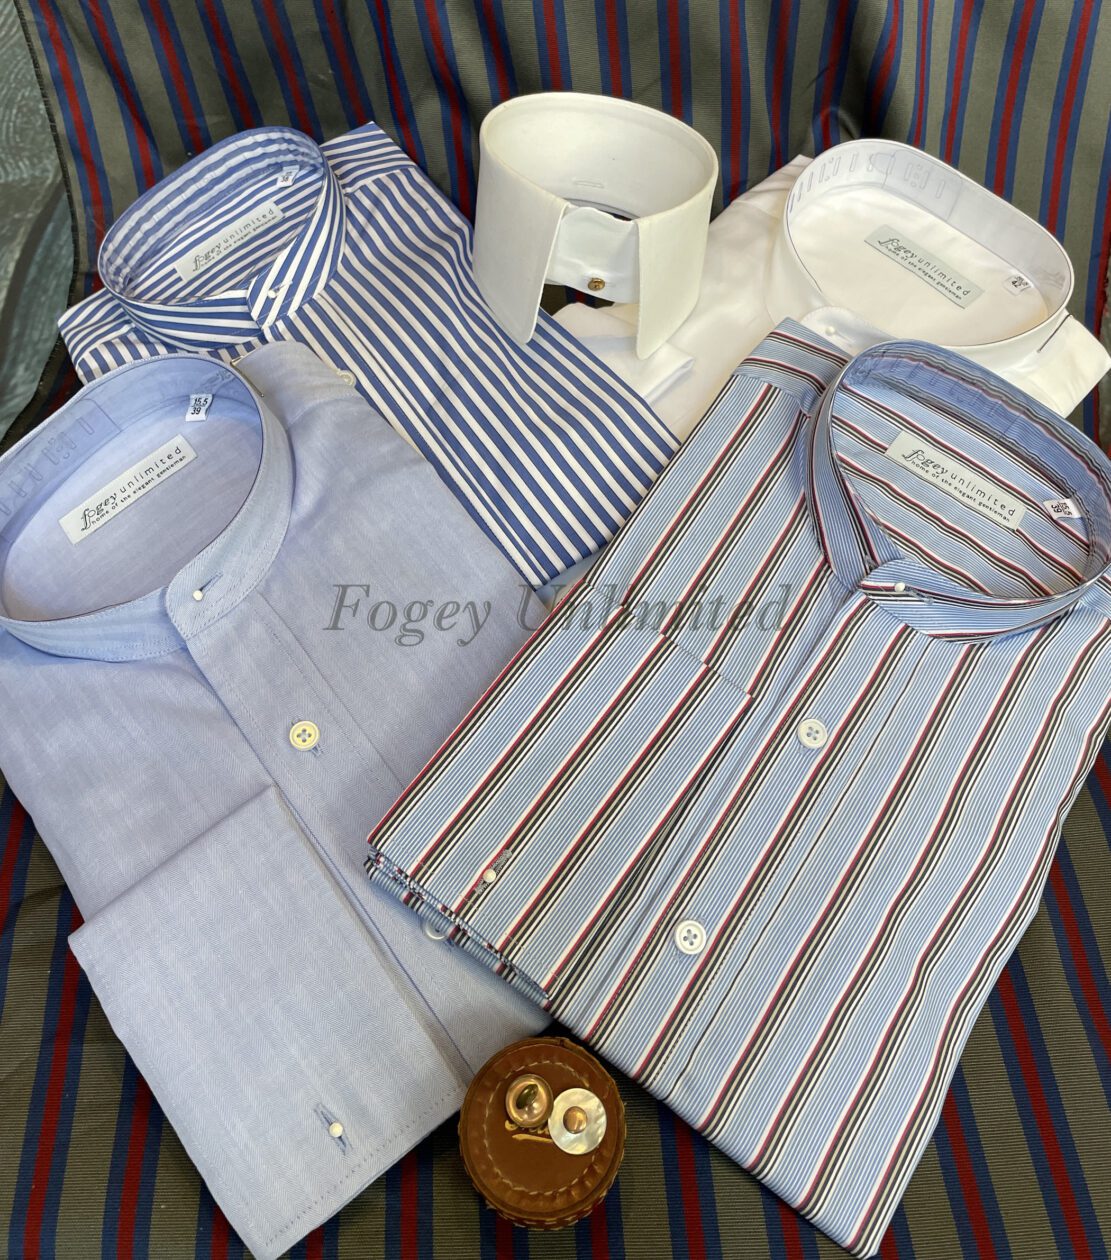 Exclusive to Fogey Unlimited: The Stiff Collar Shirt Starter Pack. A Shirt, a Stiff Collar and Collar studs